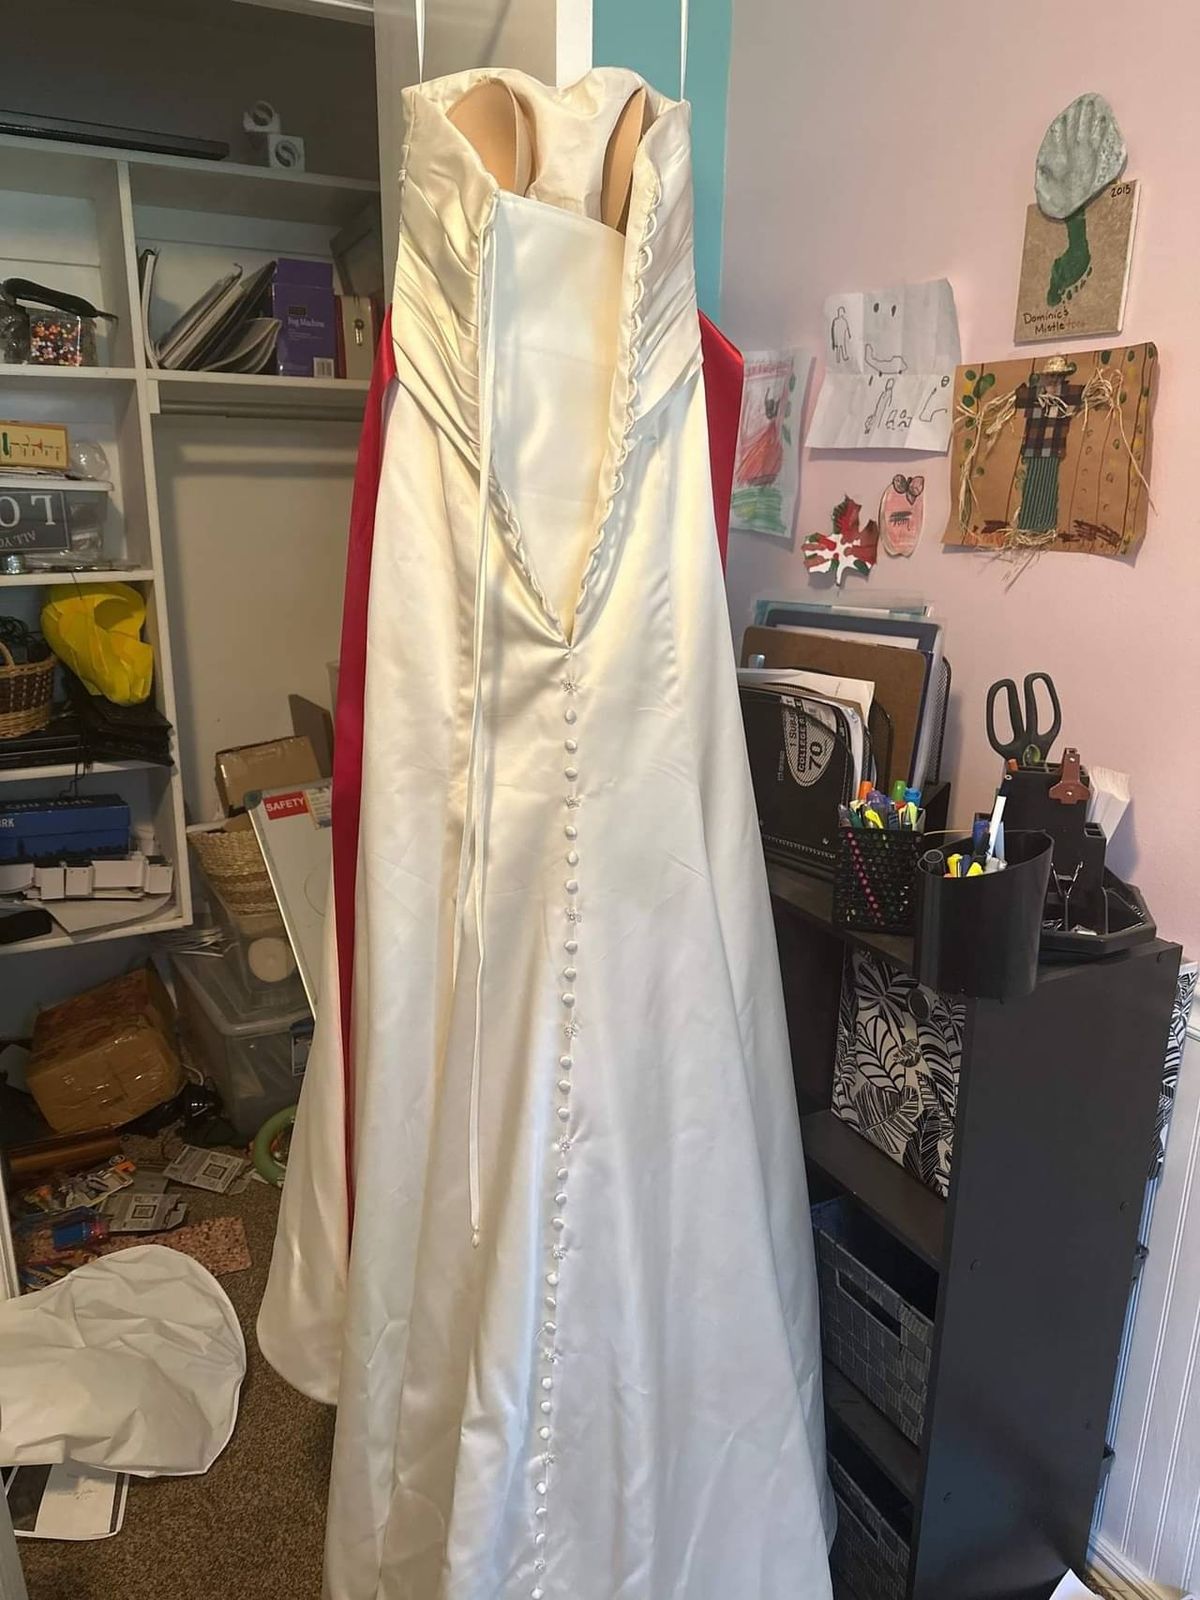 Size 6 White Floor Length Maxi on Queenly